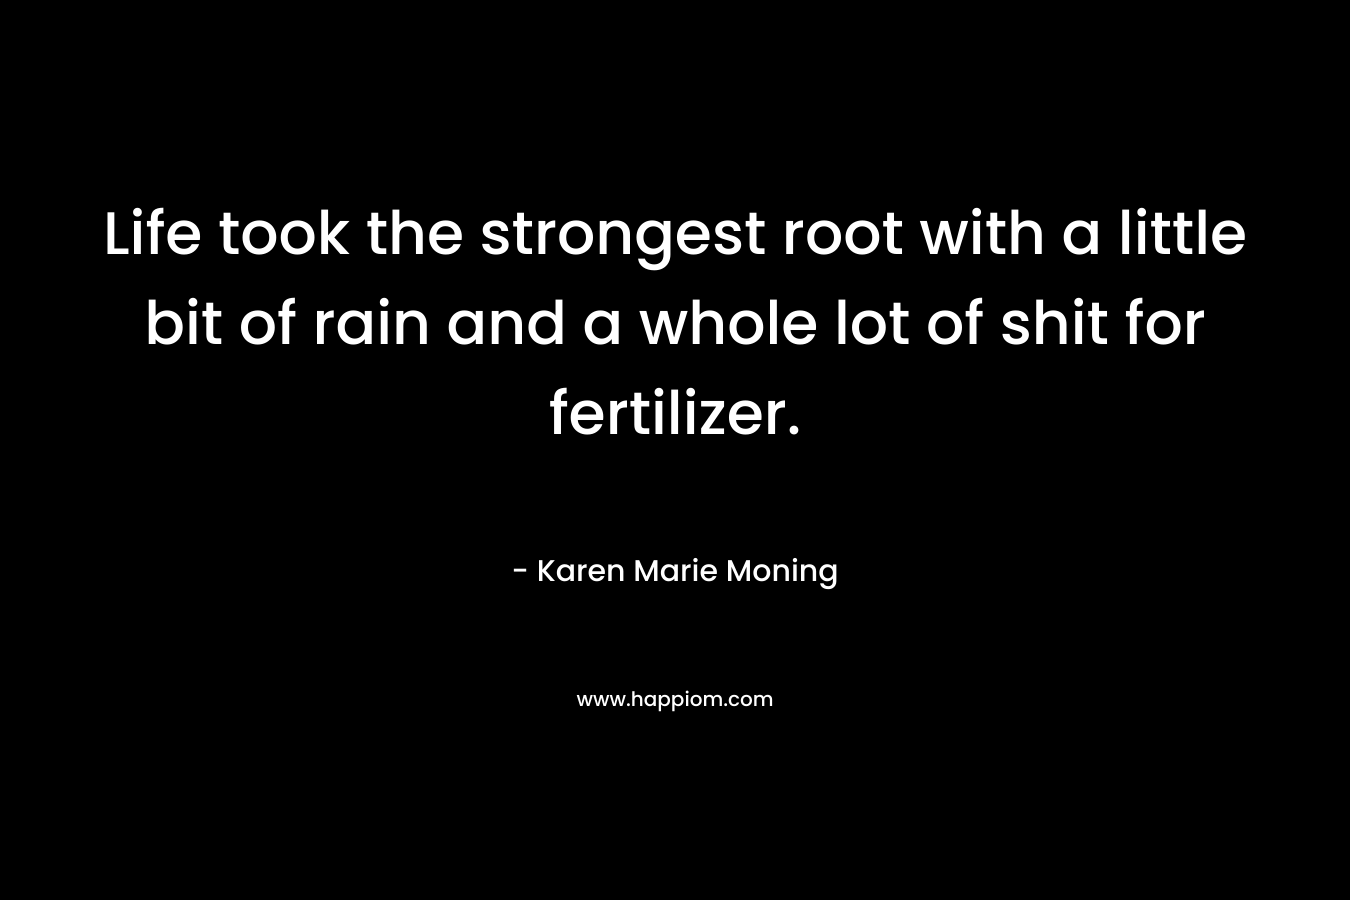 Life took the strongest root with a little bit of rain and a whole lot of shit for fertilizer. – Karen Marie Moning